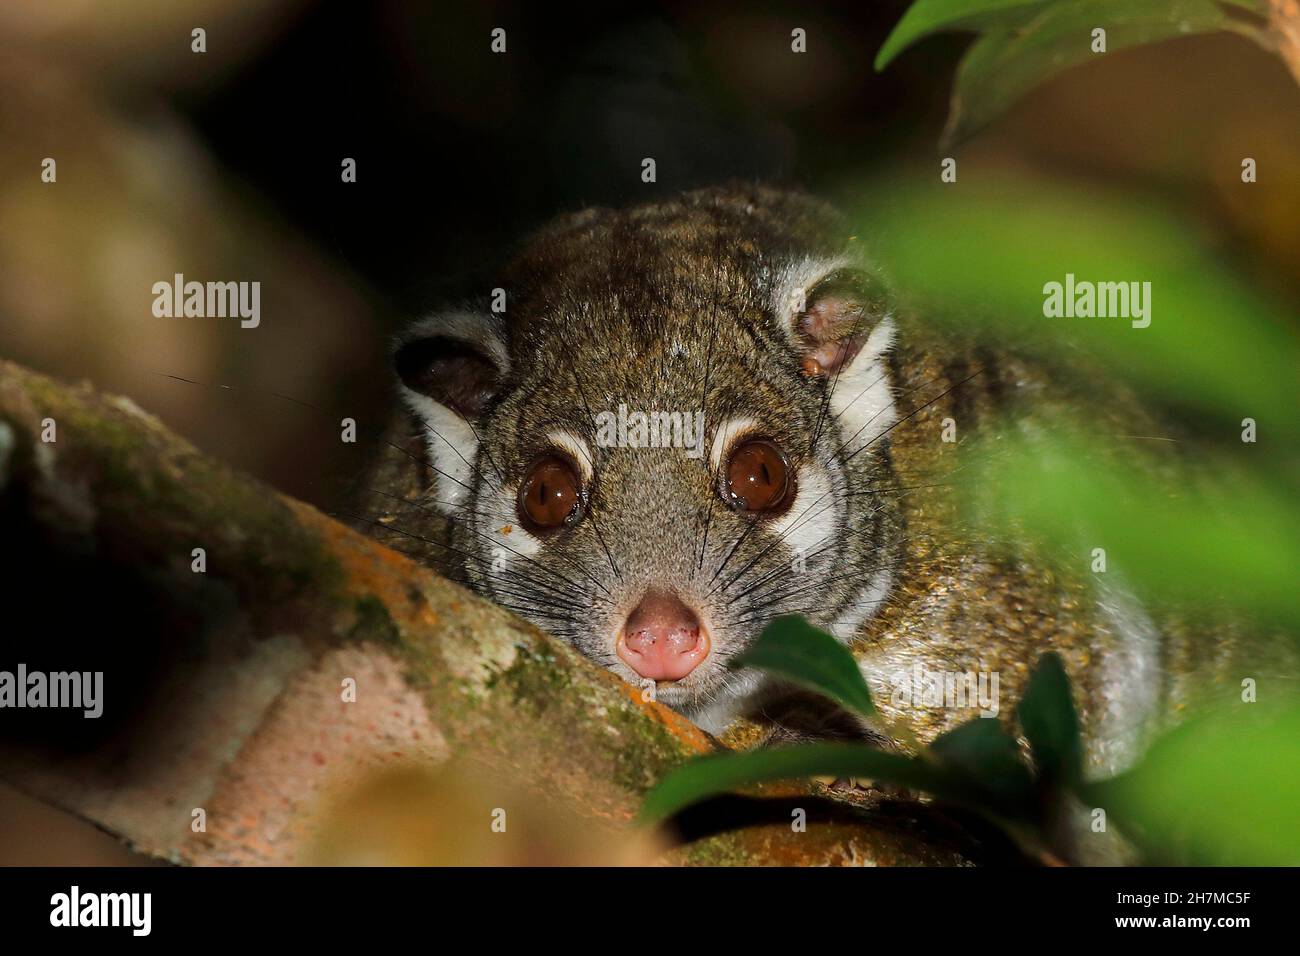 Green ringtail possum (Pseudochirops archeri) head of a possum in a tree at night, showing the small white patches below the big eyes and small ears. Stock Photo